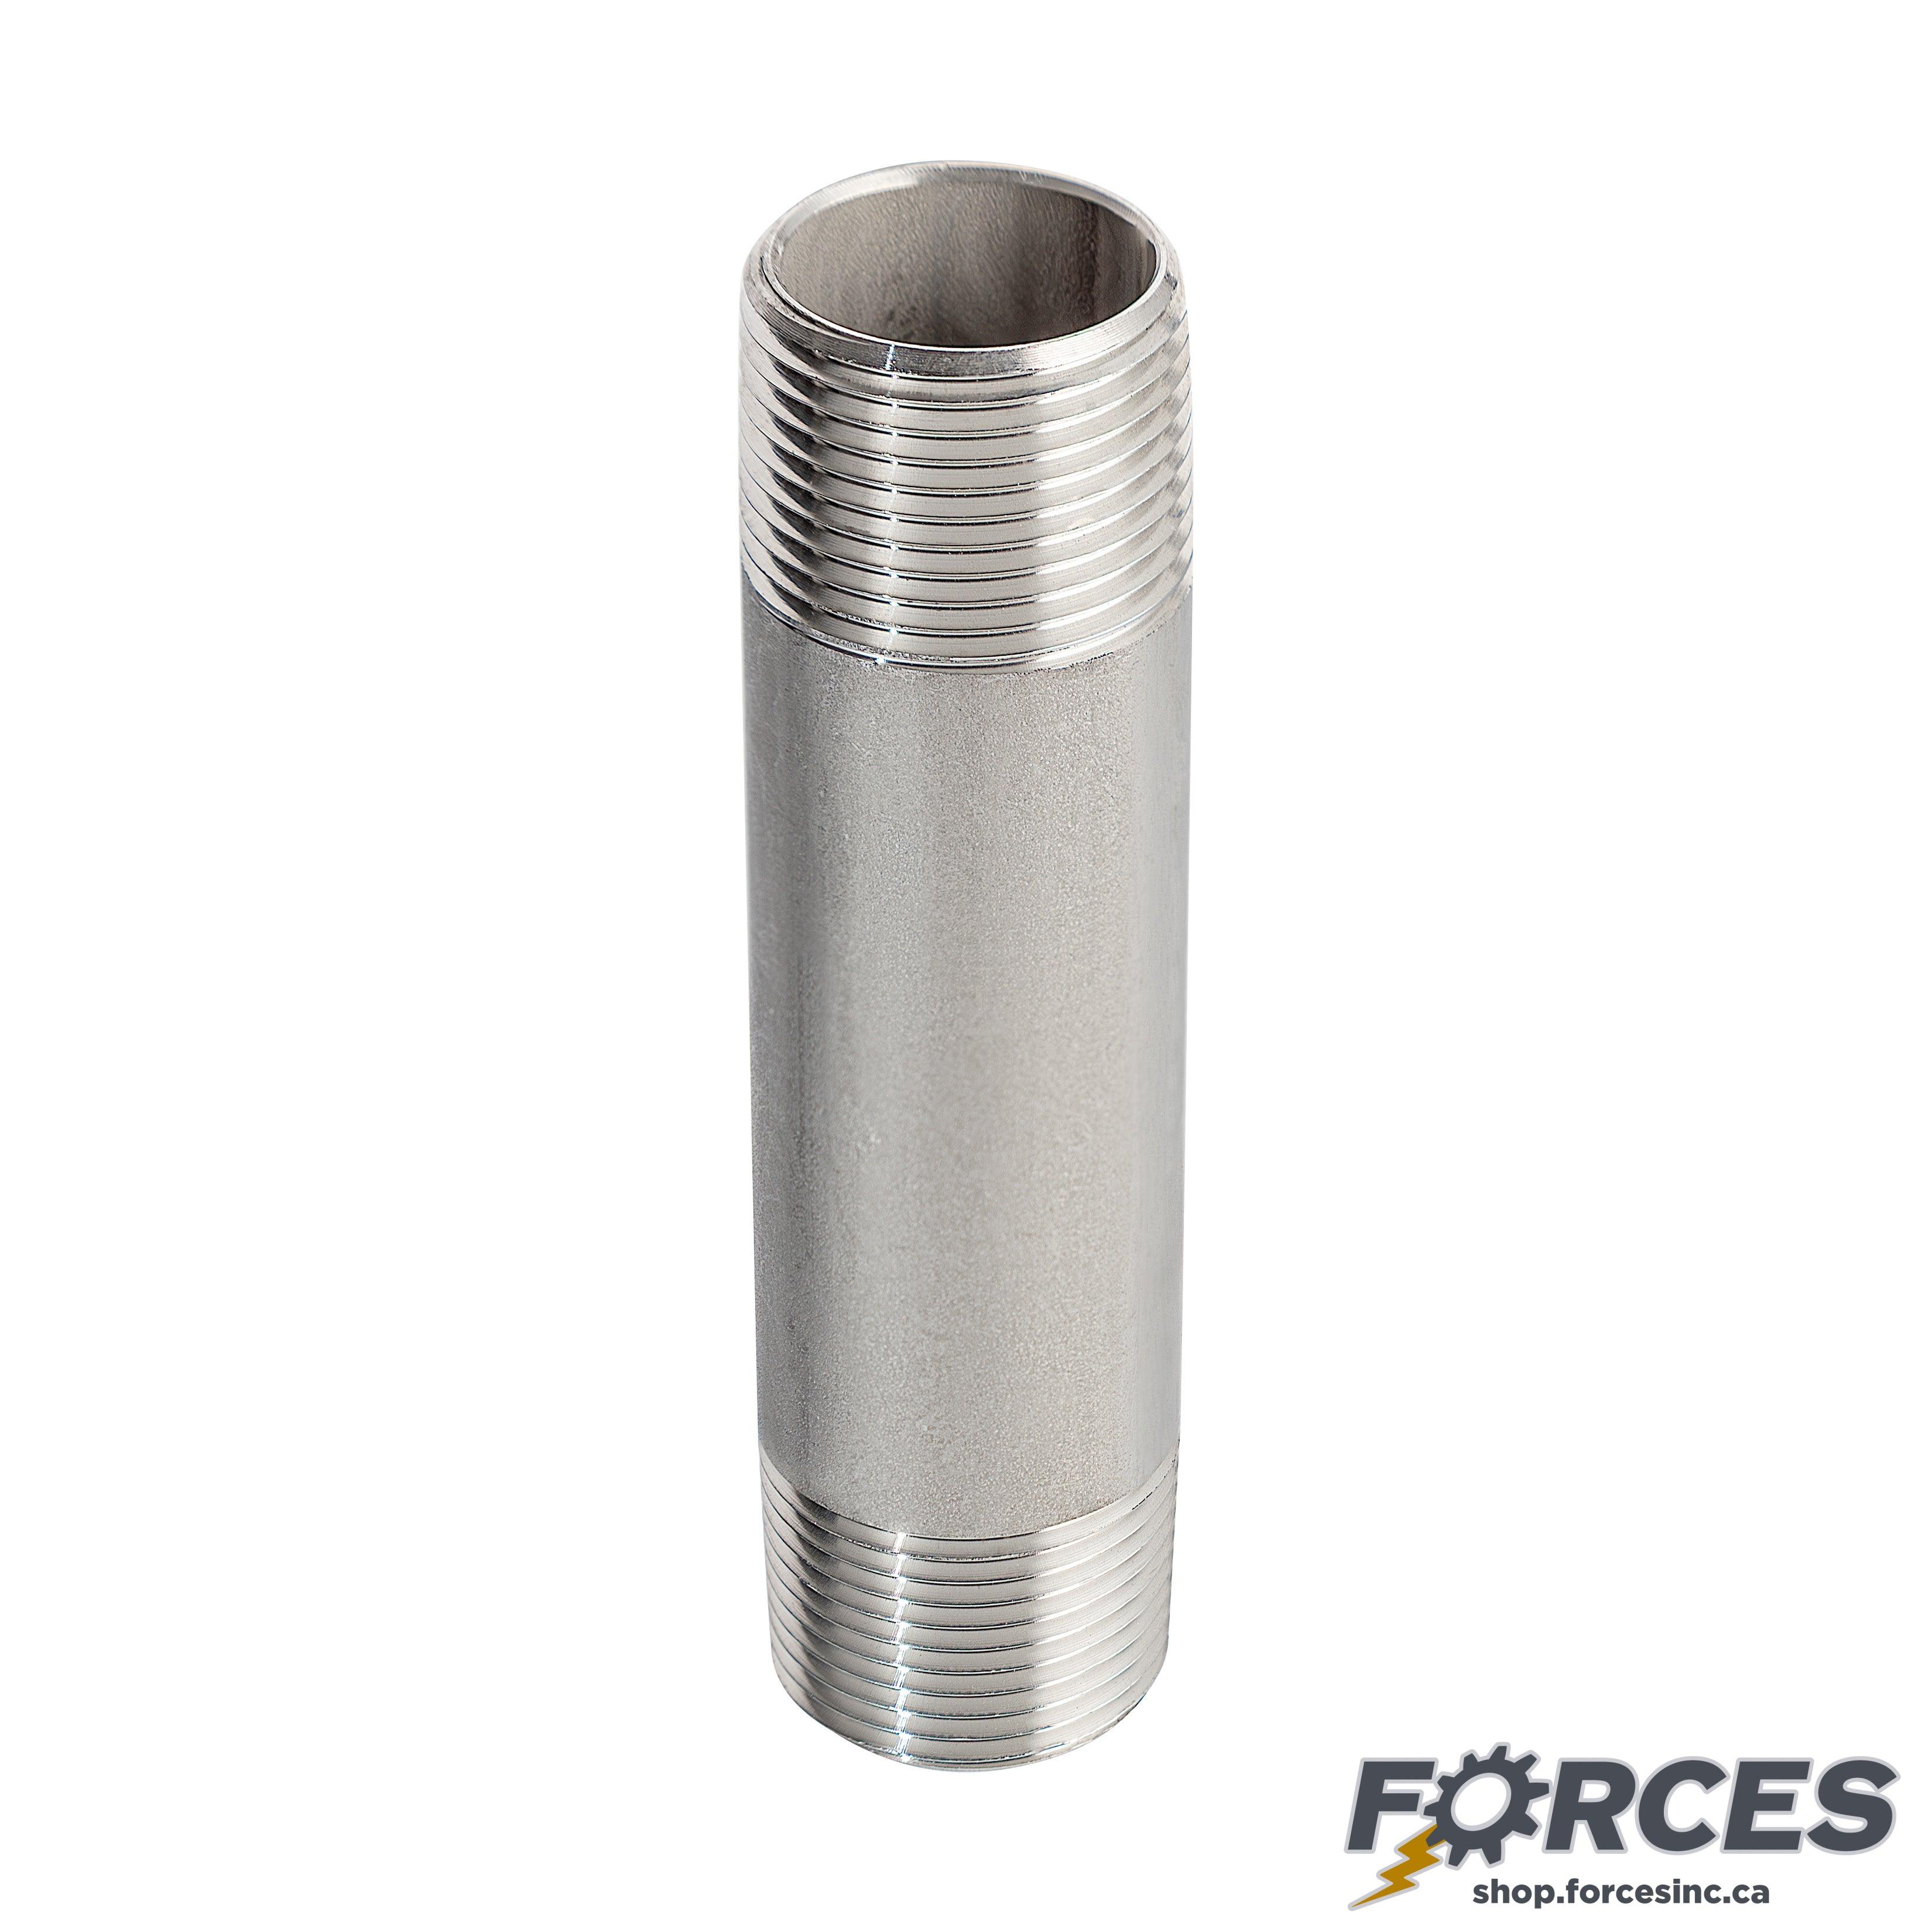 4" X 8" Long Nipple - Stainless Steel 316 - Forces Inc